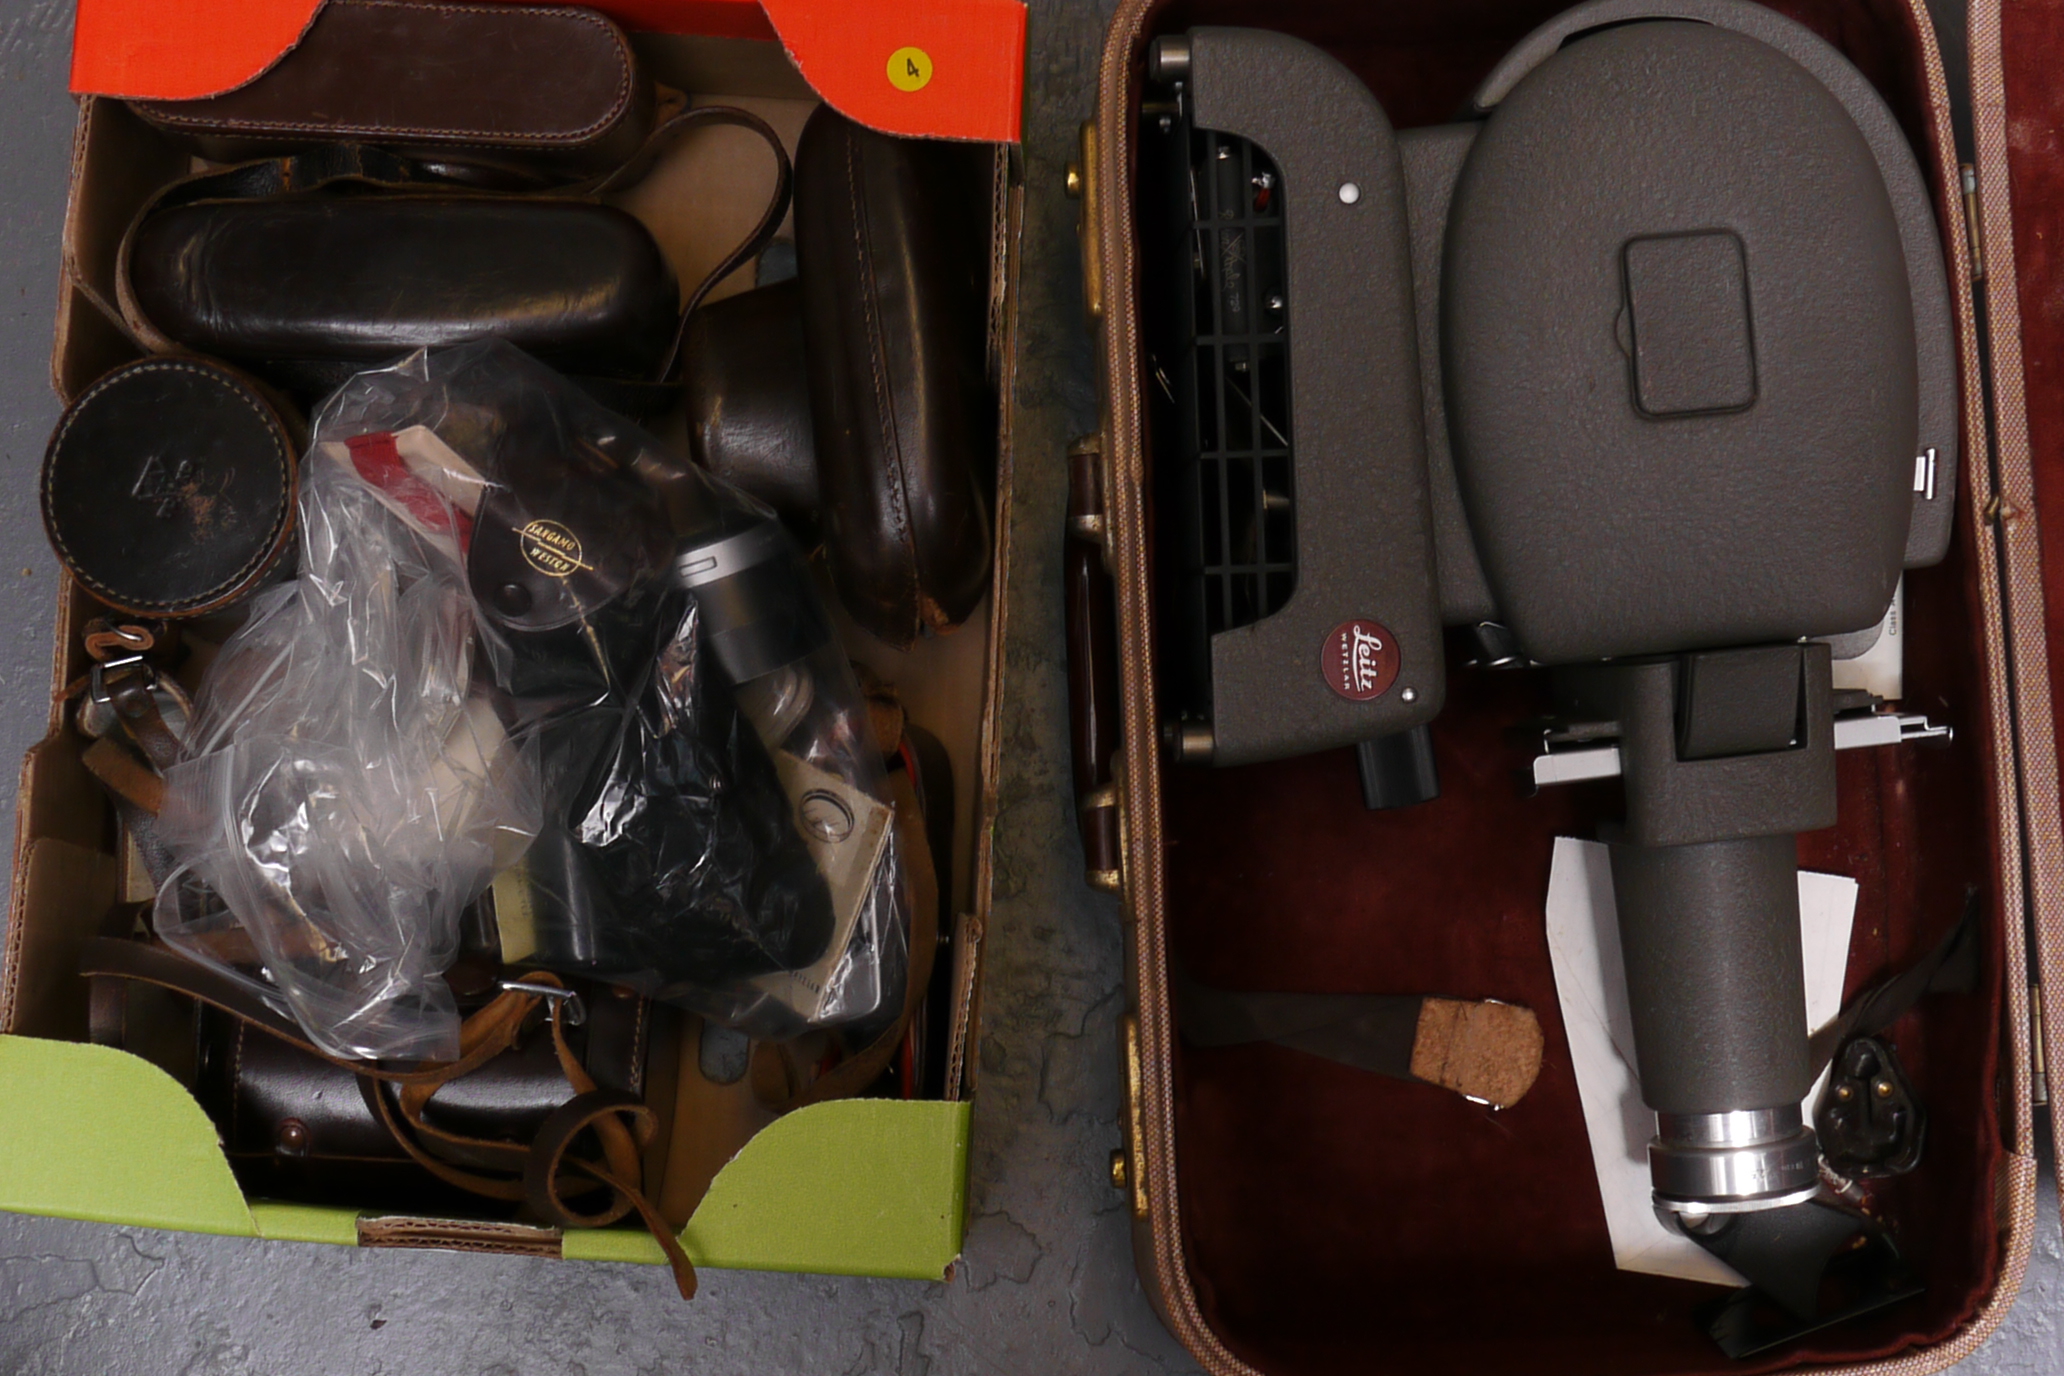 Leica Items: a Prado Projector in Makers case with camera cases, meters and other items (2 boxes)